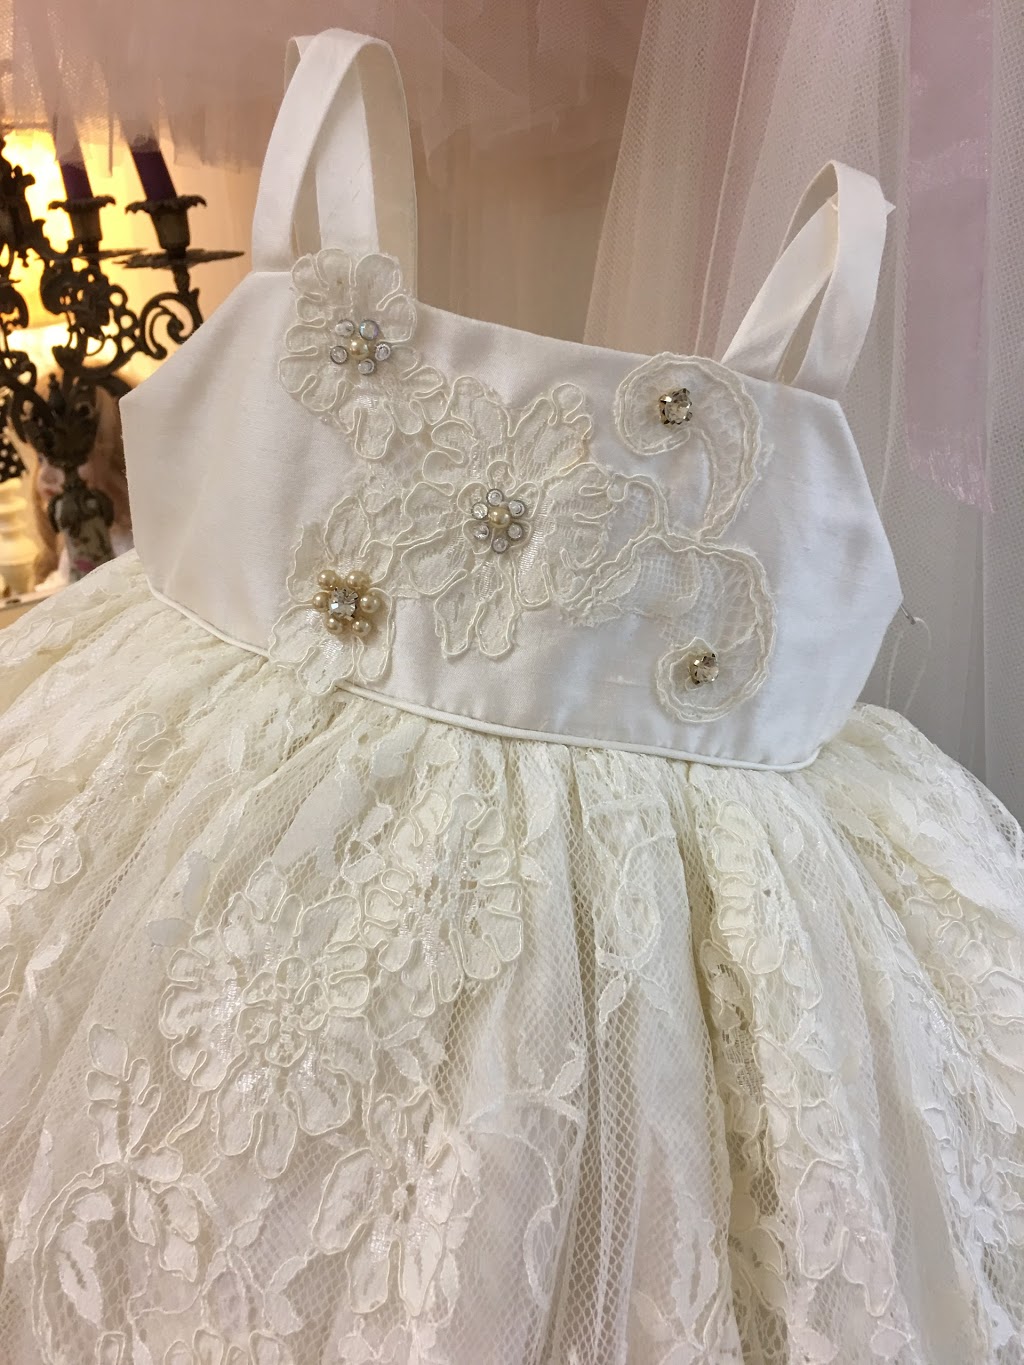 Beautiful Things & Christenings | clothing store | 2/76 Princes Hwy, Fairy Meadow NSW 2519, Australia | 0242844444 OR +61 2 4284 4444